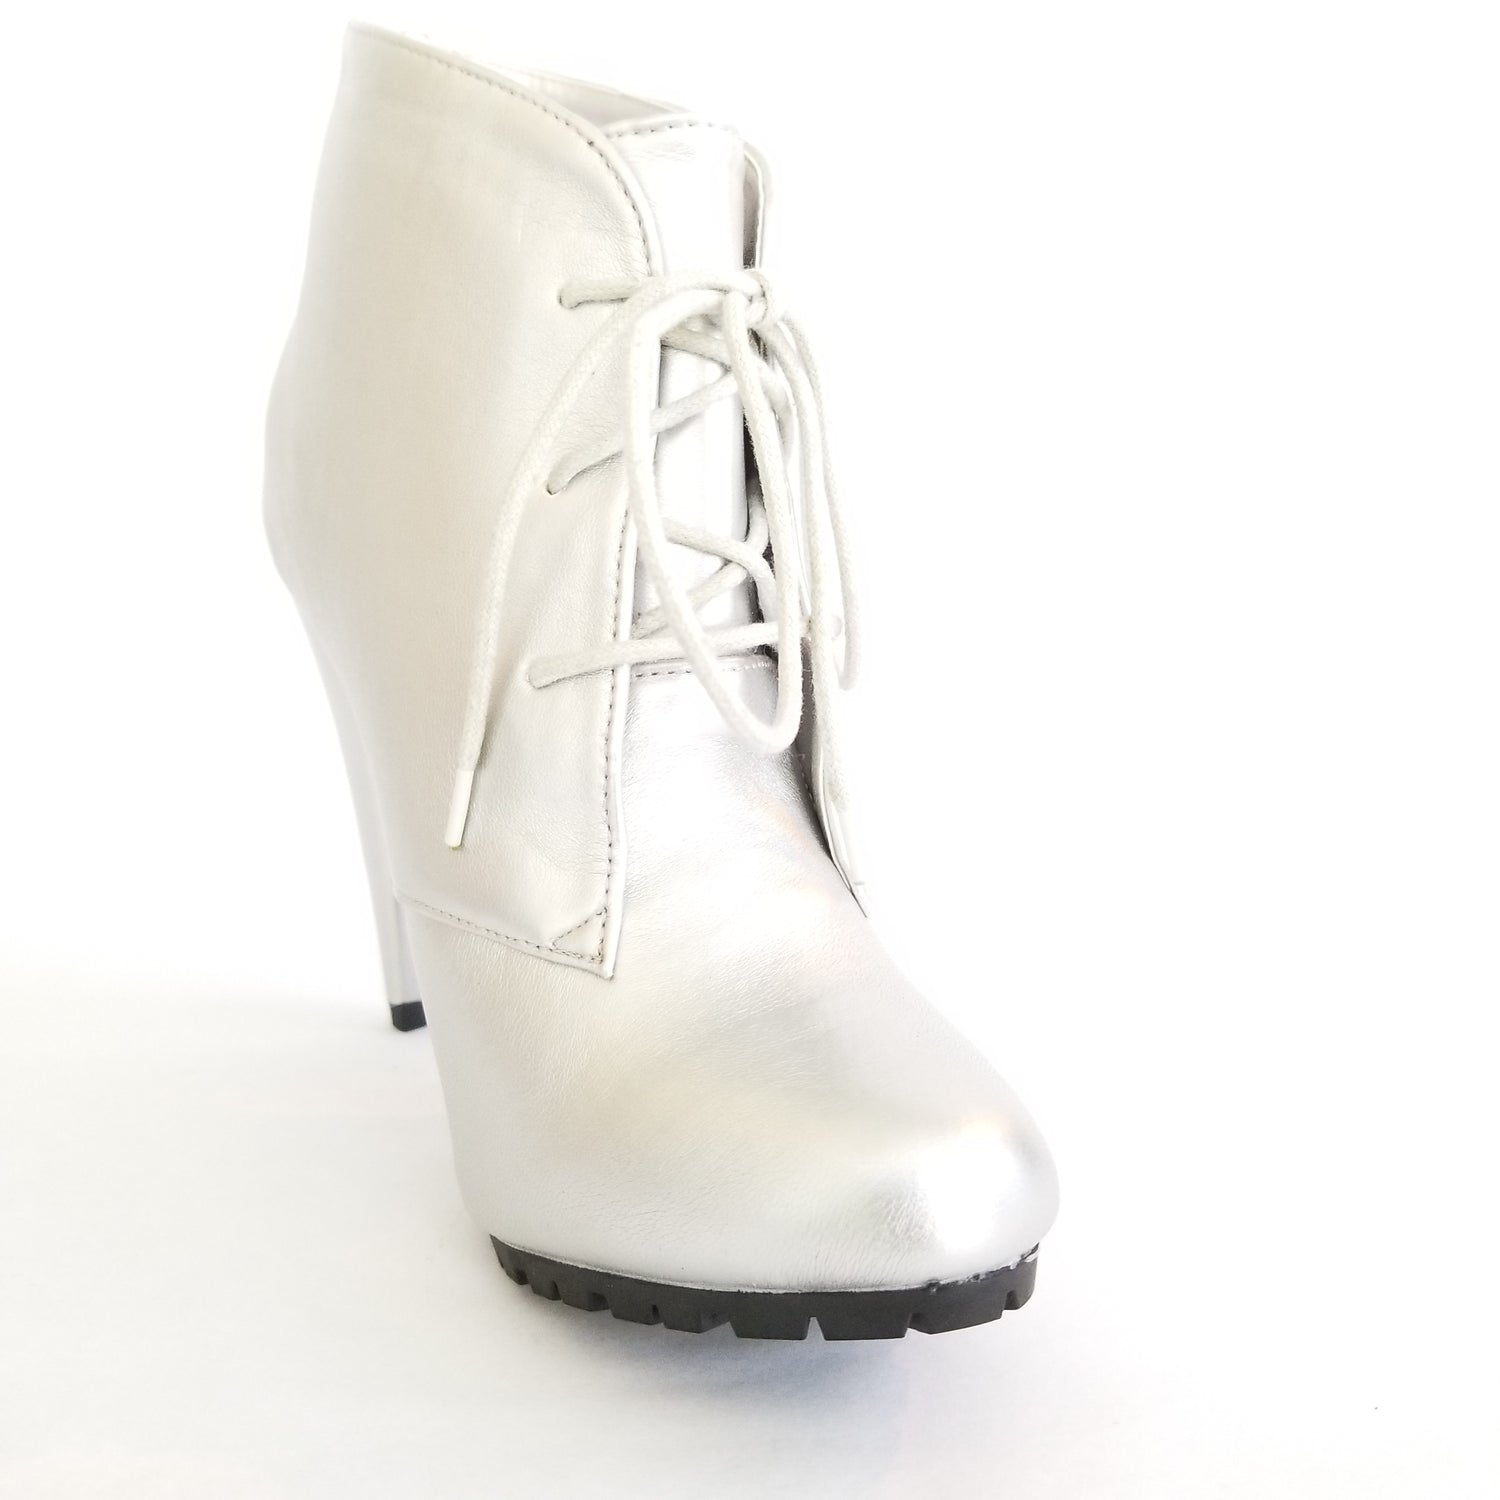 Vicky Silver High Heel Boots - Didi Royale